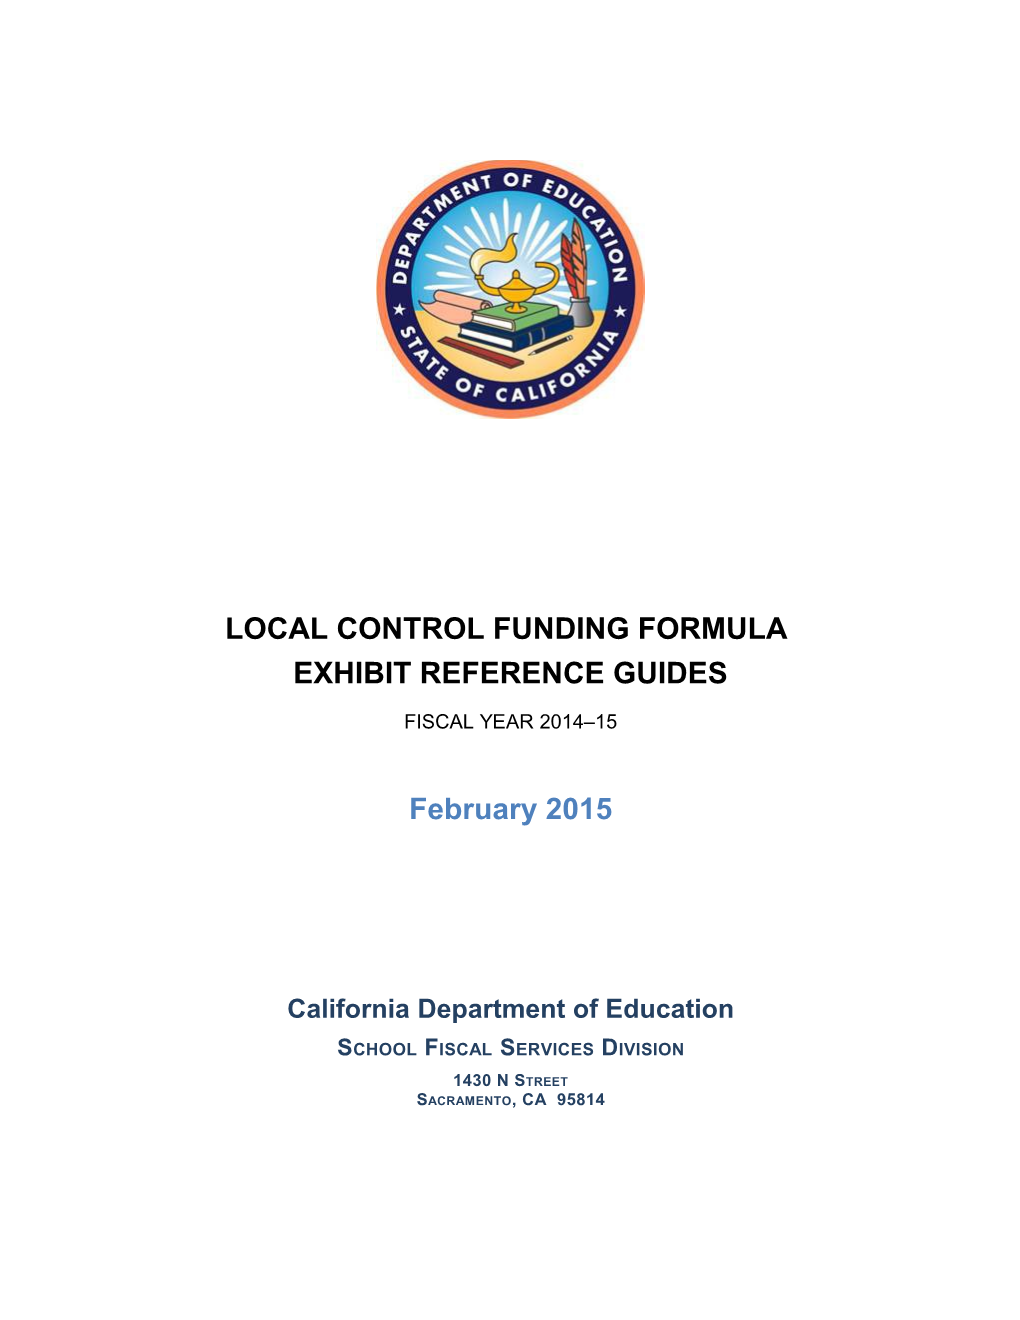 Exhibit Reference Guide, FY 2014-15 - Principal Apportionment (CA Dept of Education)